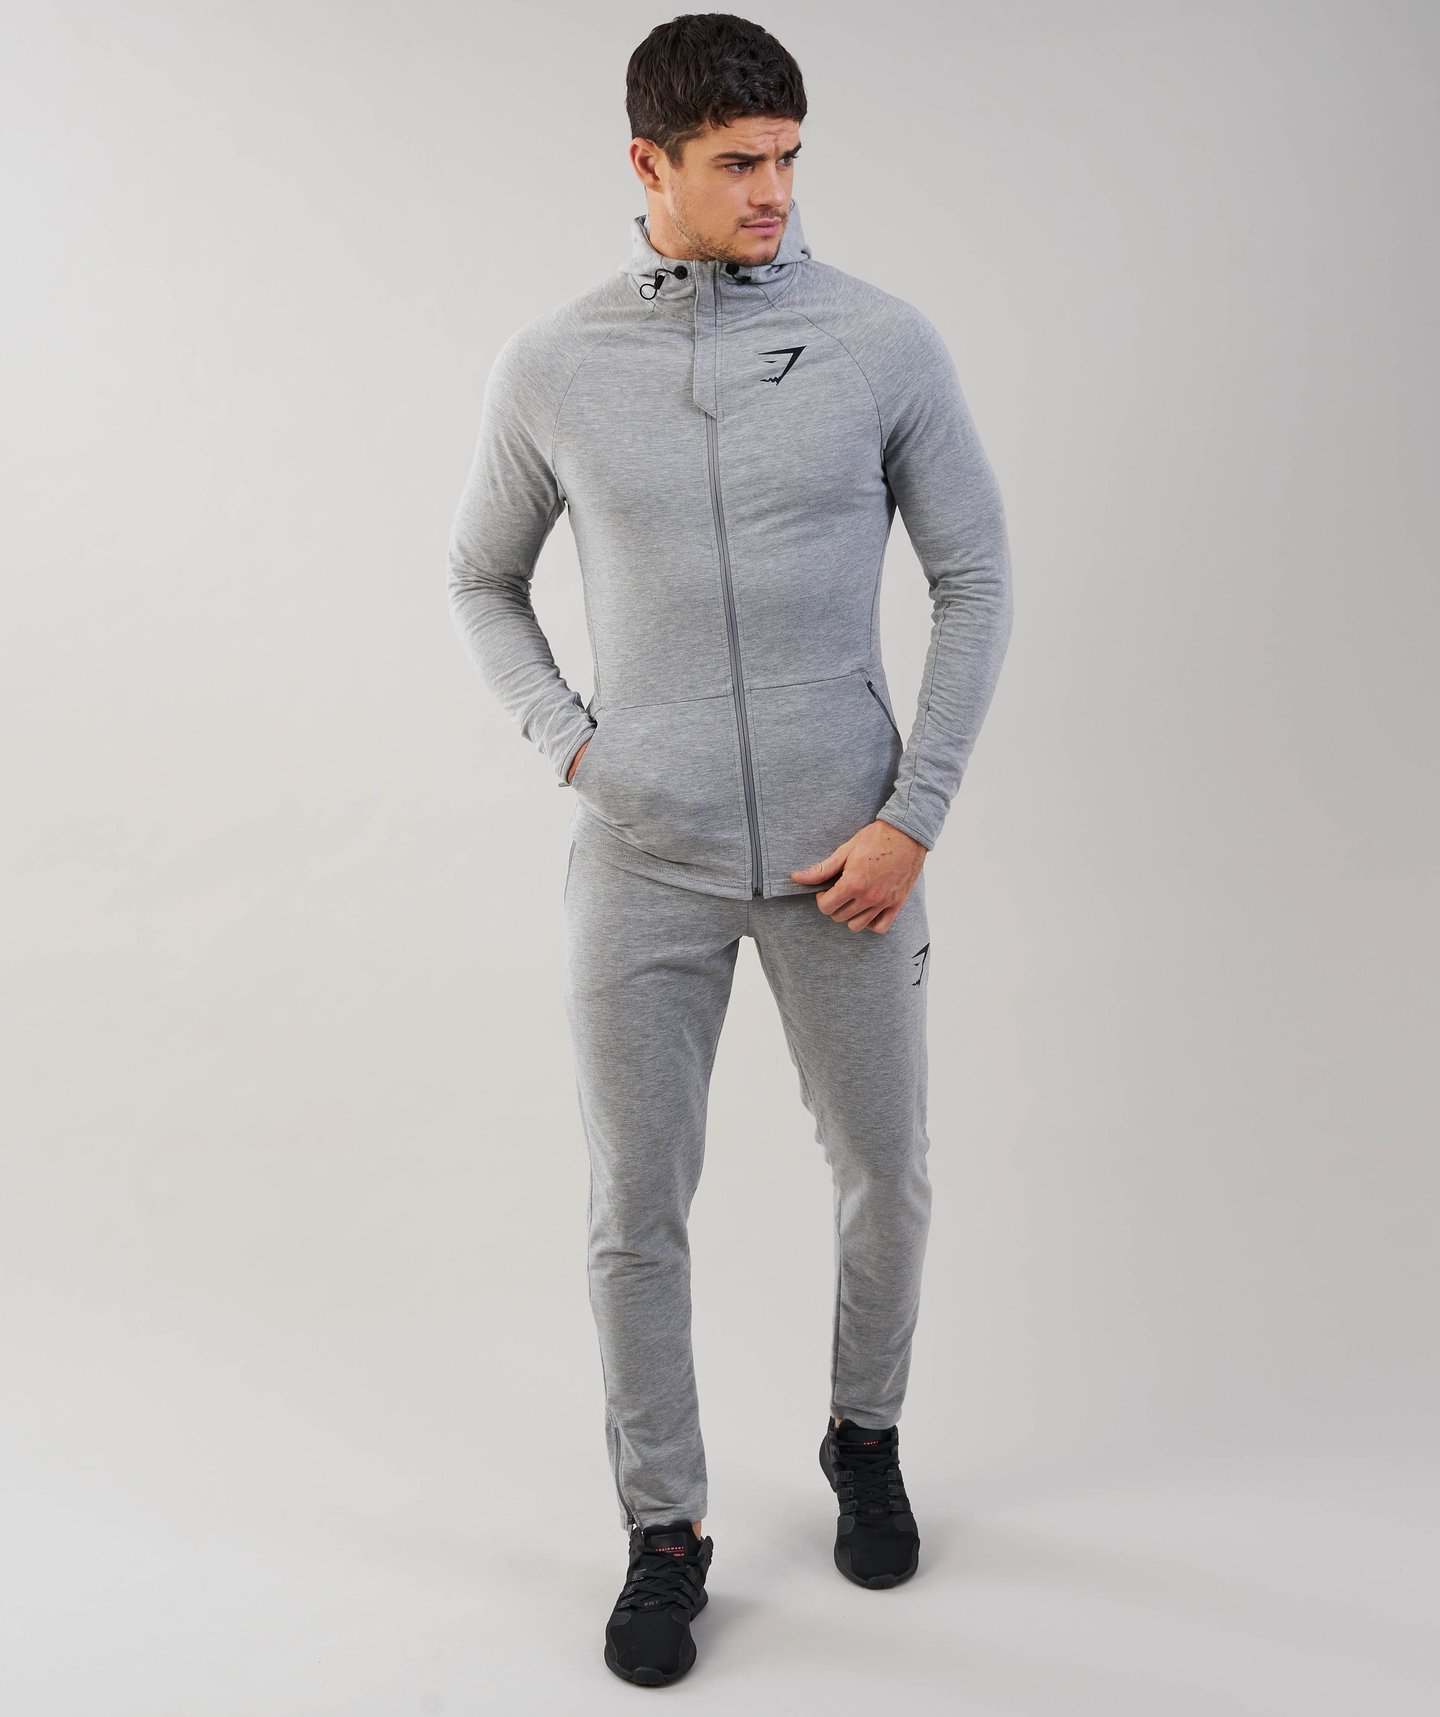 GYMSHARK FIT HOODED TOP – LIGHT GREY MARL (AUTHENTIC) – Brofit